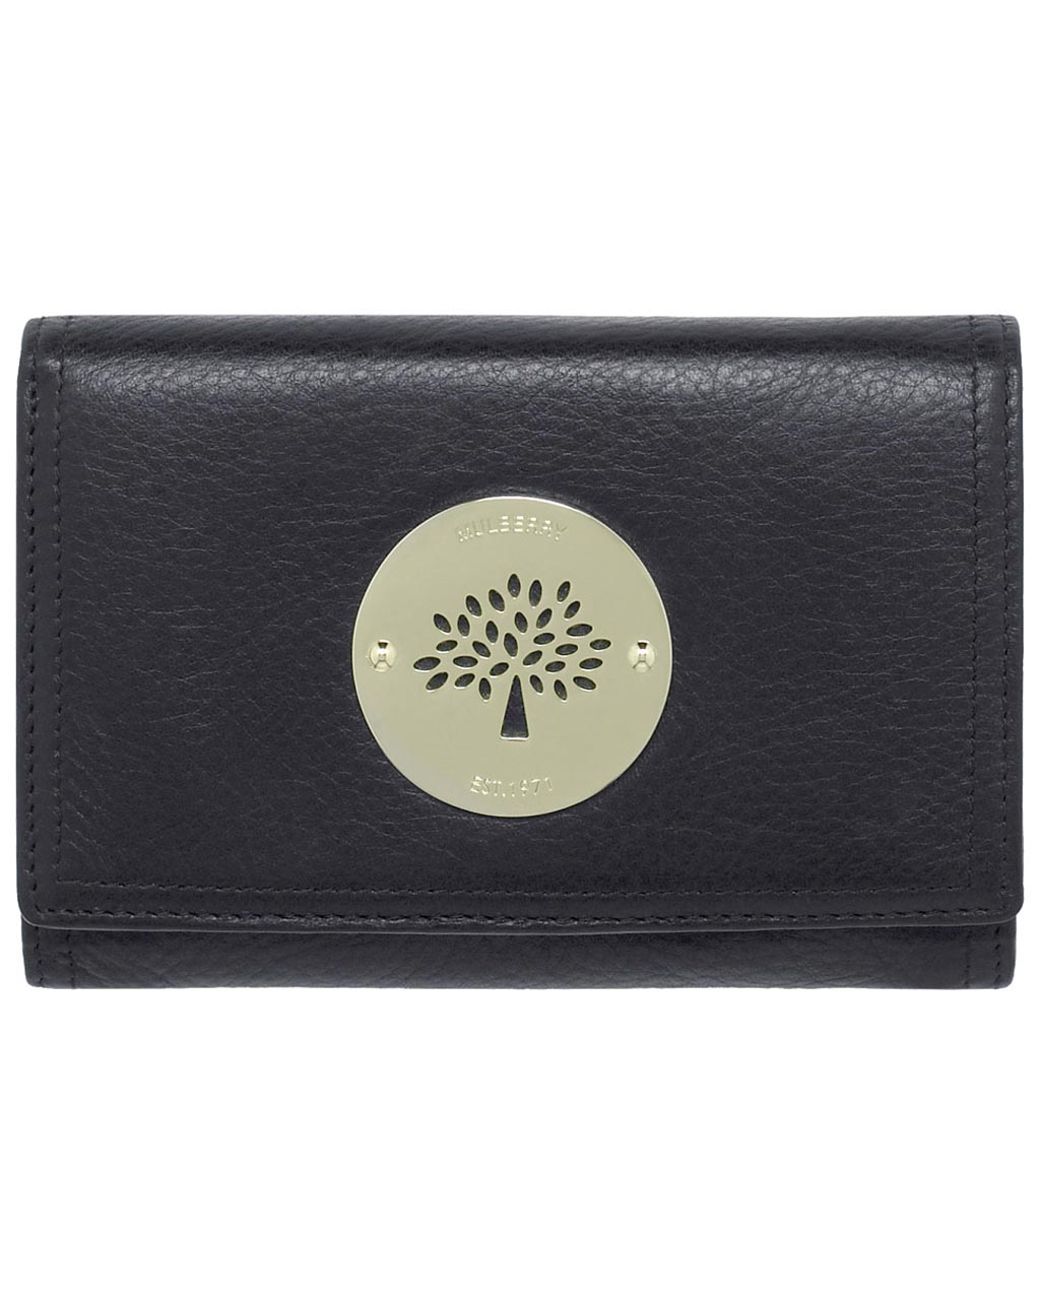 Mulberry Daria French Purse in Black | Lyst